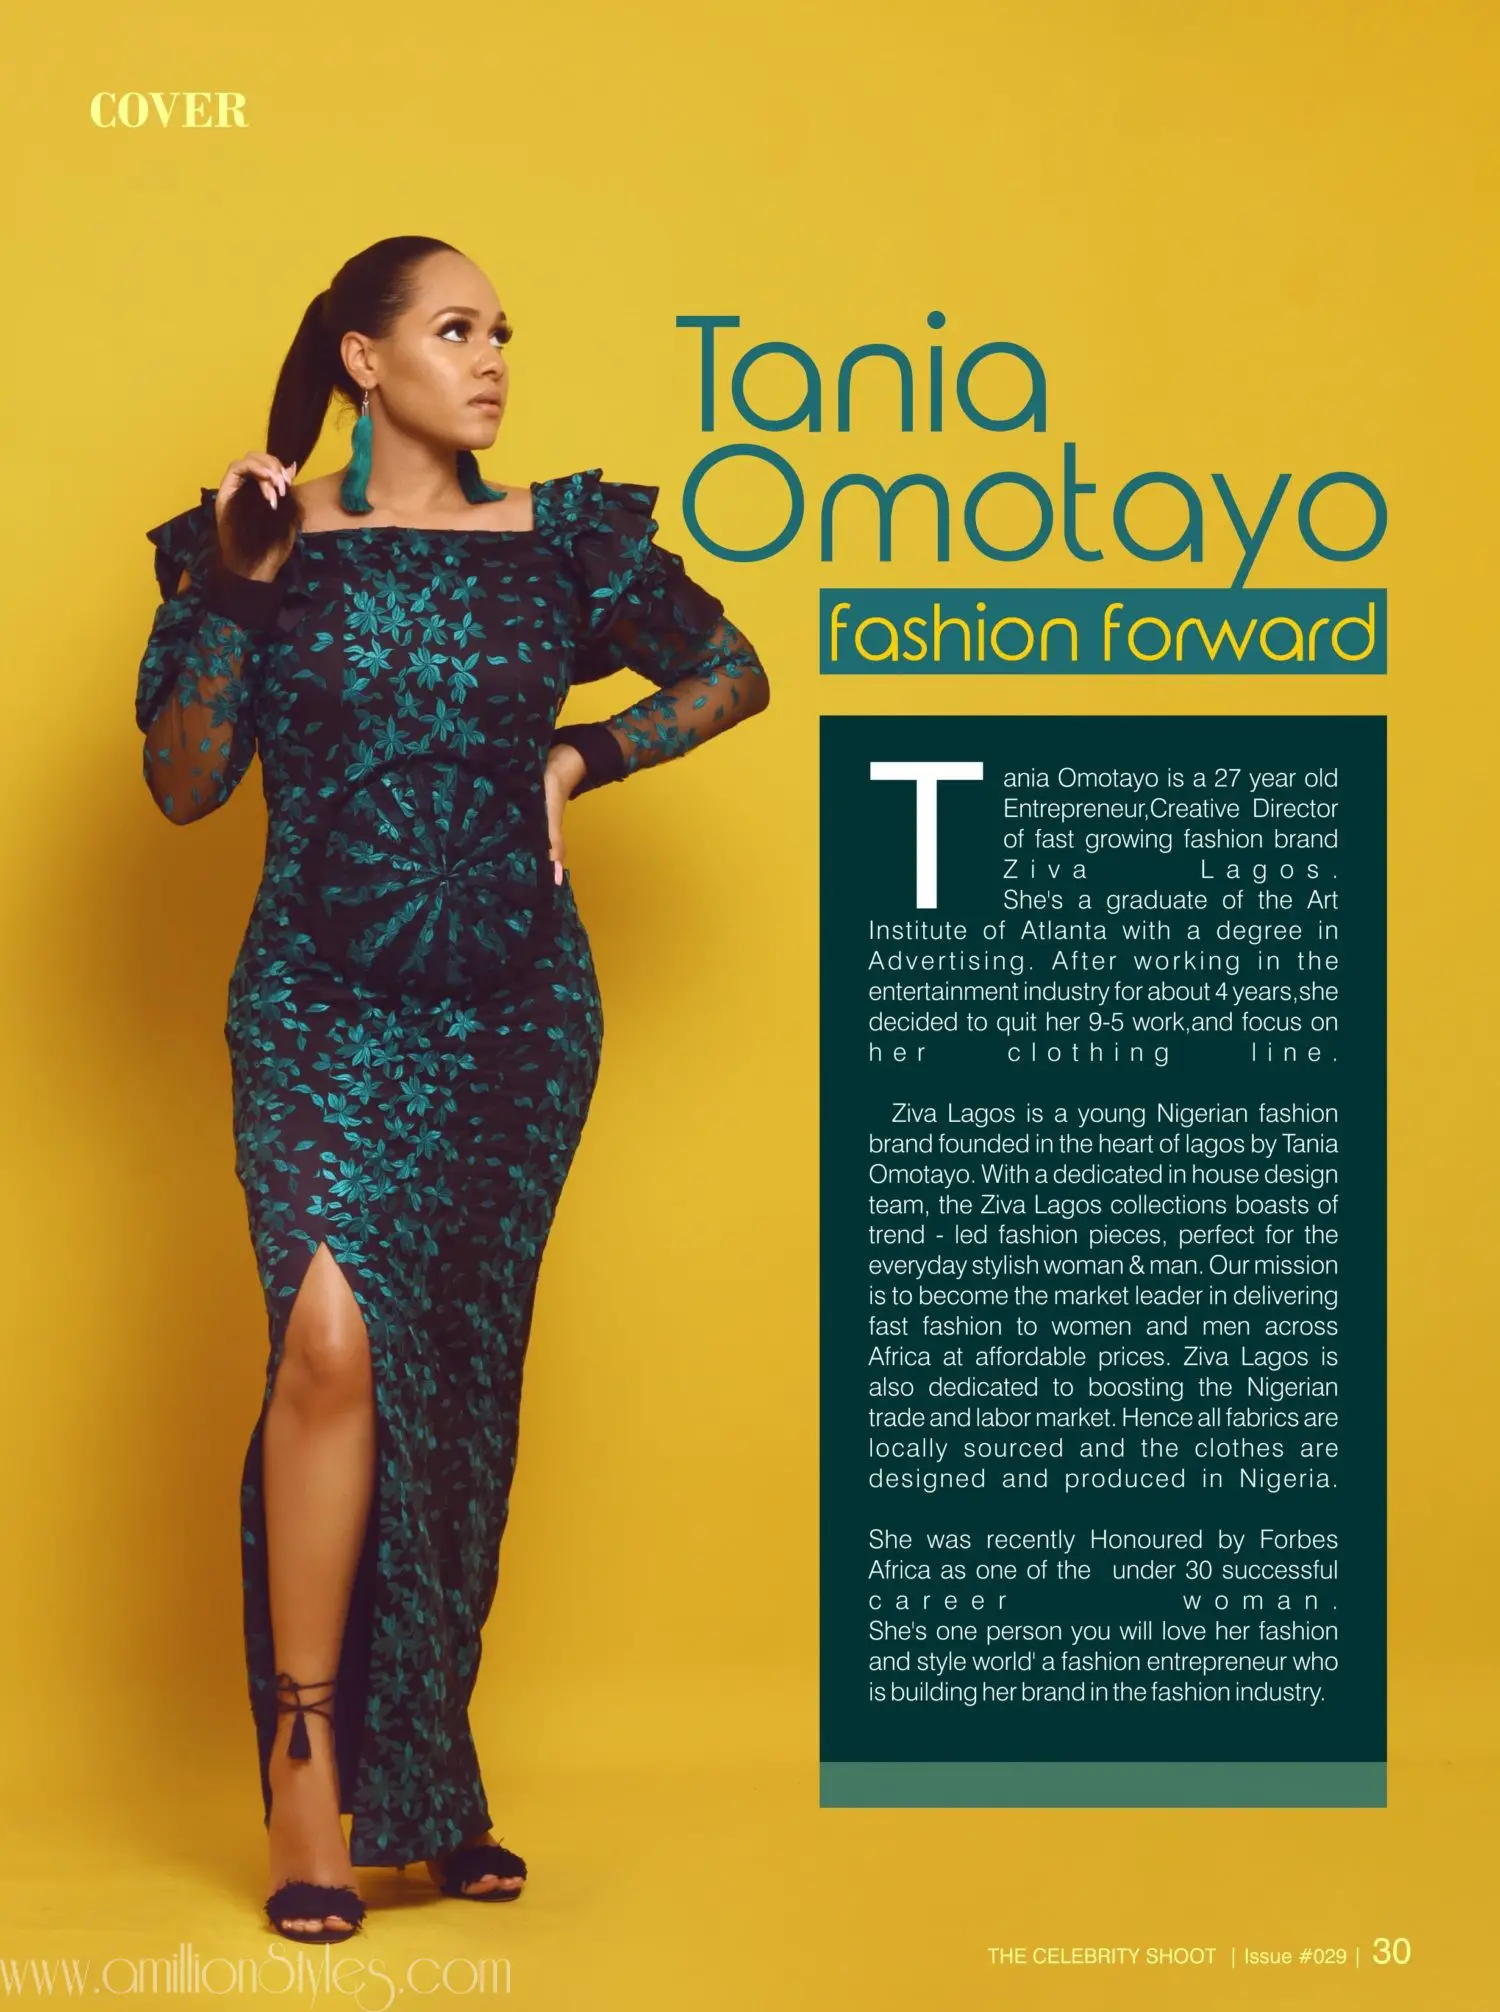 Tania Omotayo and Olarslim Glow On The Cover of The Celebrity Shoot Magazine’s Latest Issue!